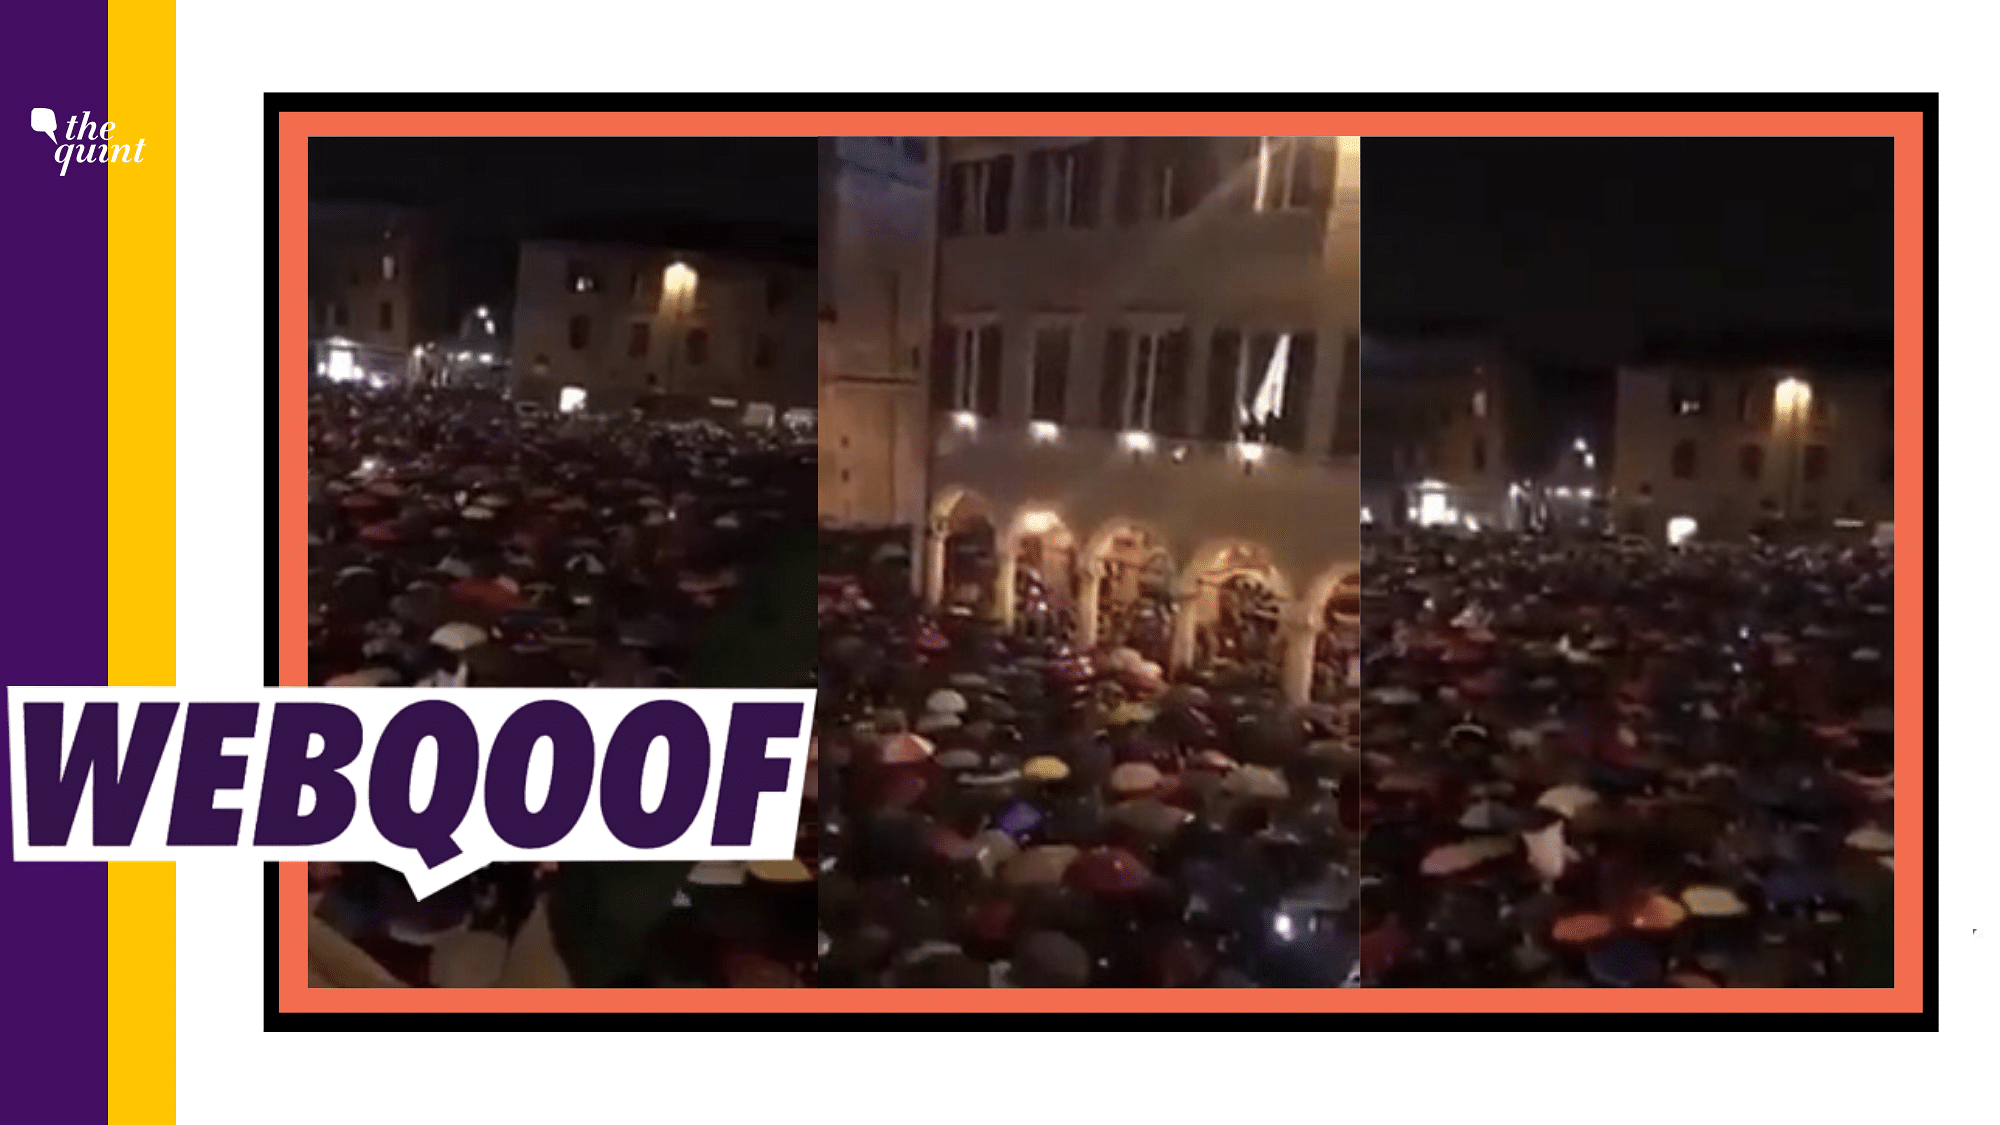 The video shows a huge crowd of people standing with umbrellas under heavy rain and singing ‘Bella Ciao’.